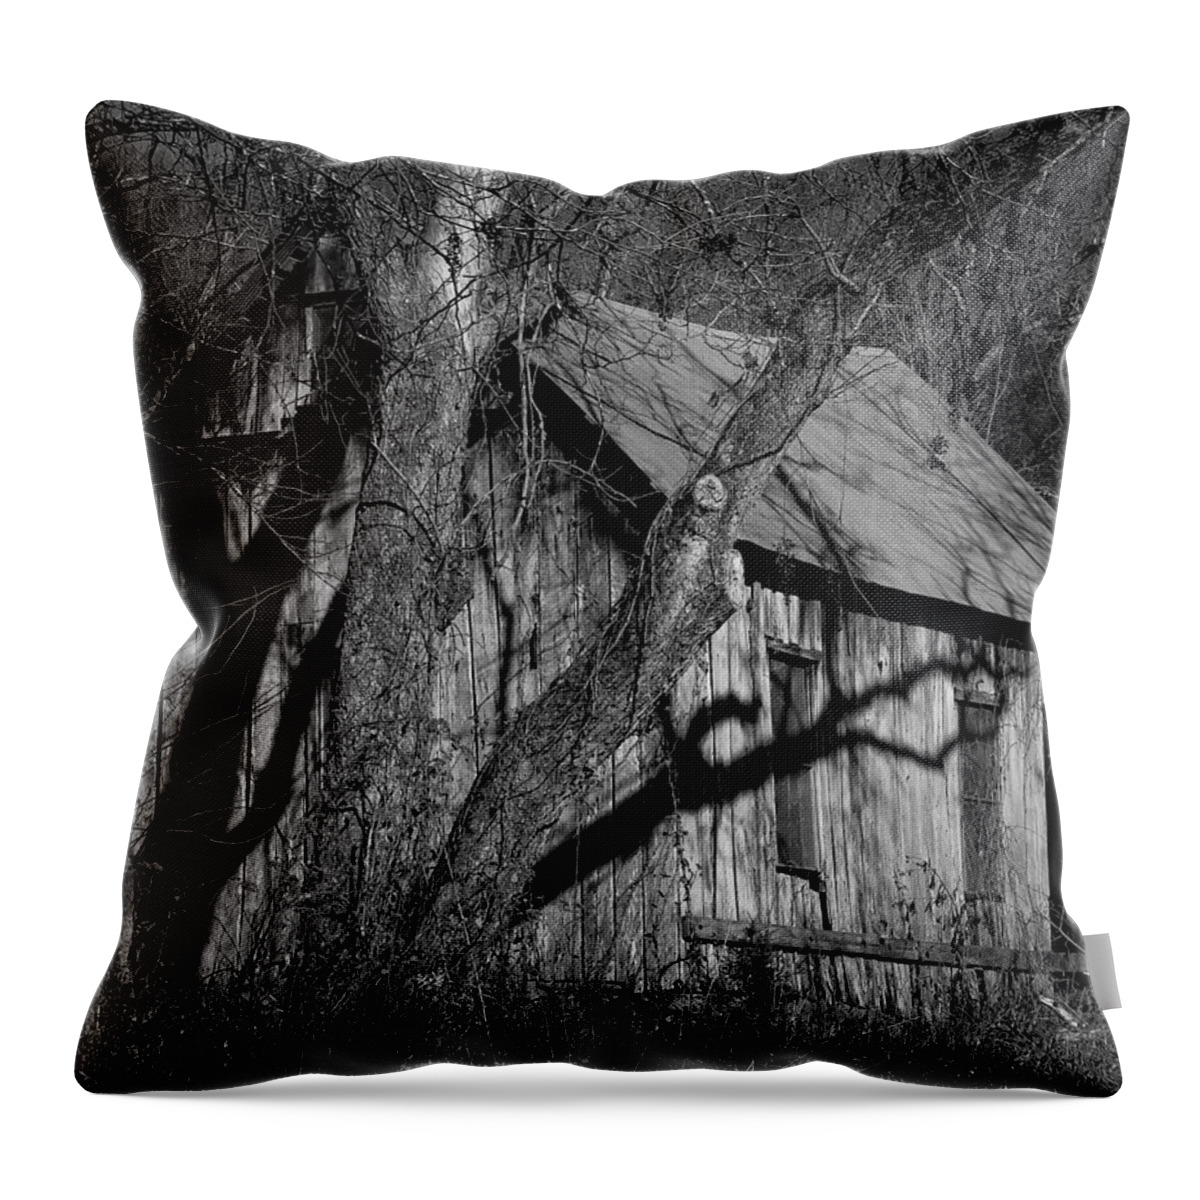 Lost Valley Throw Pillow featuring the photograph Old Clark Homestead Lost Valley by Michael Dougherty